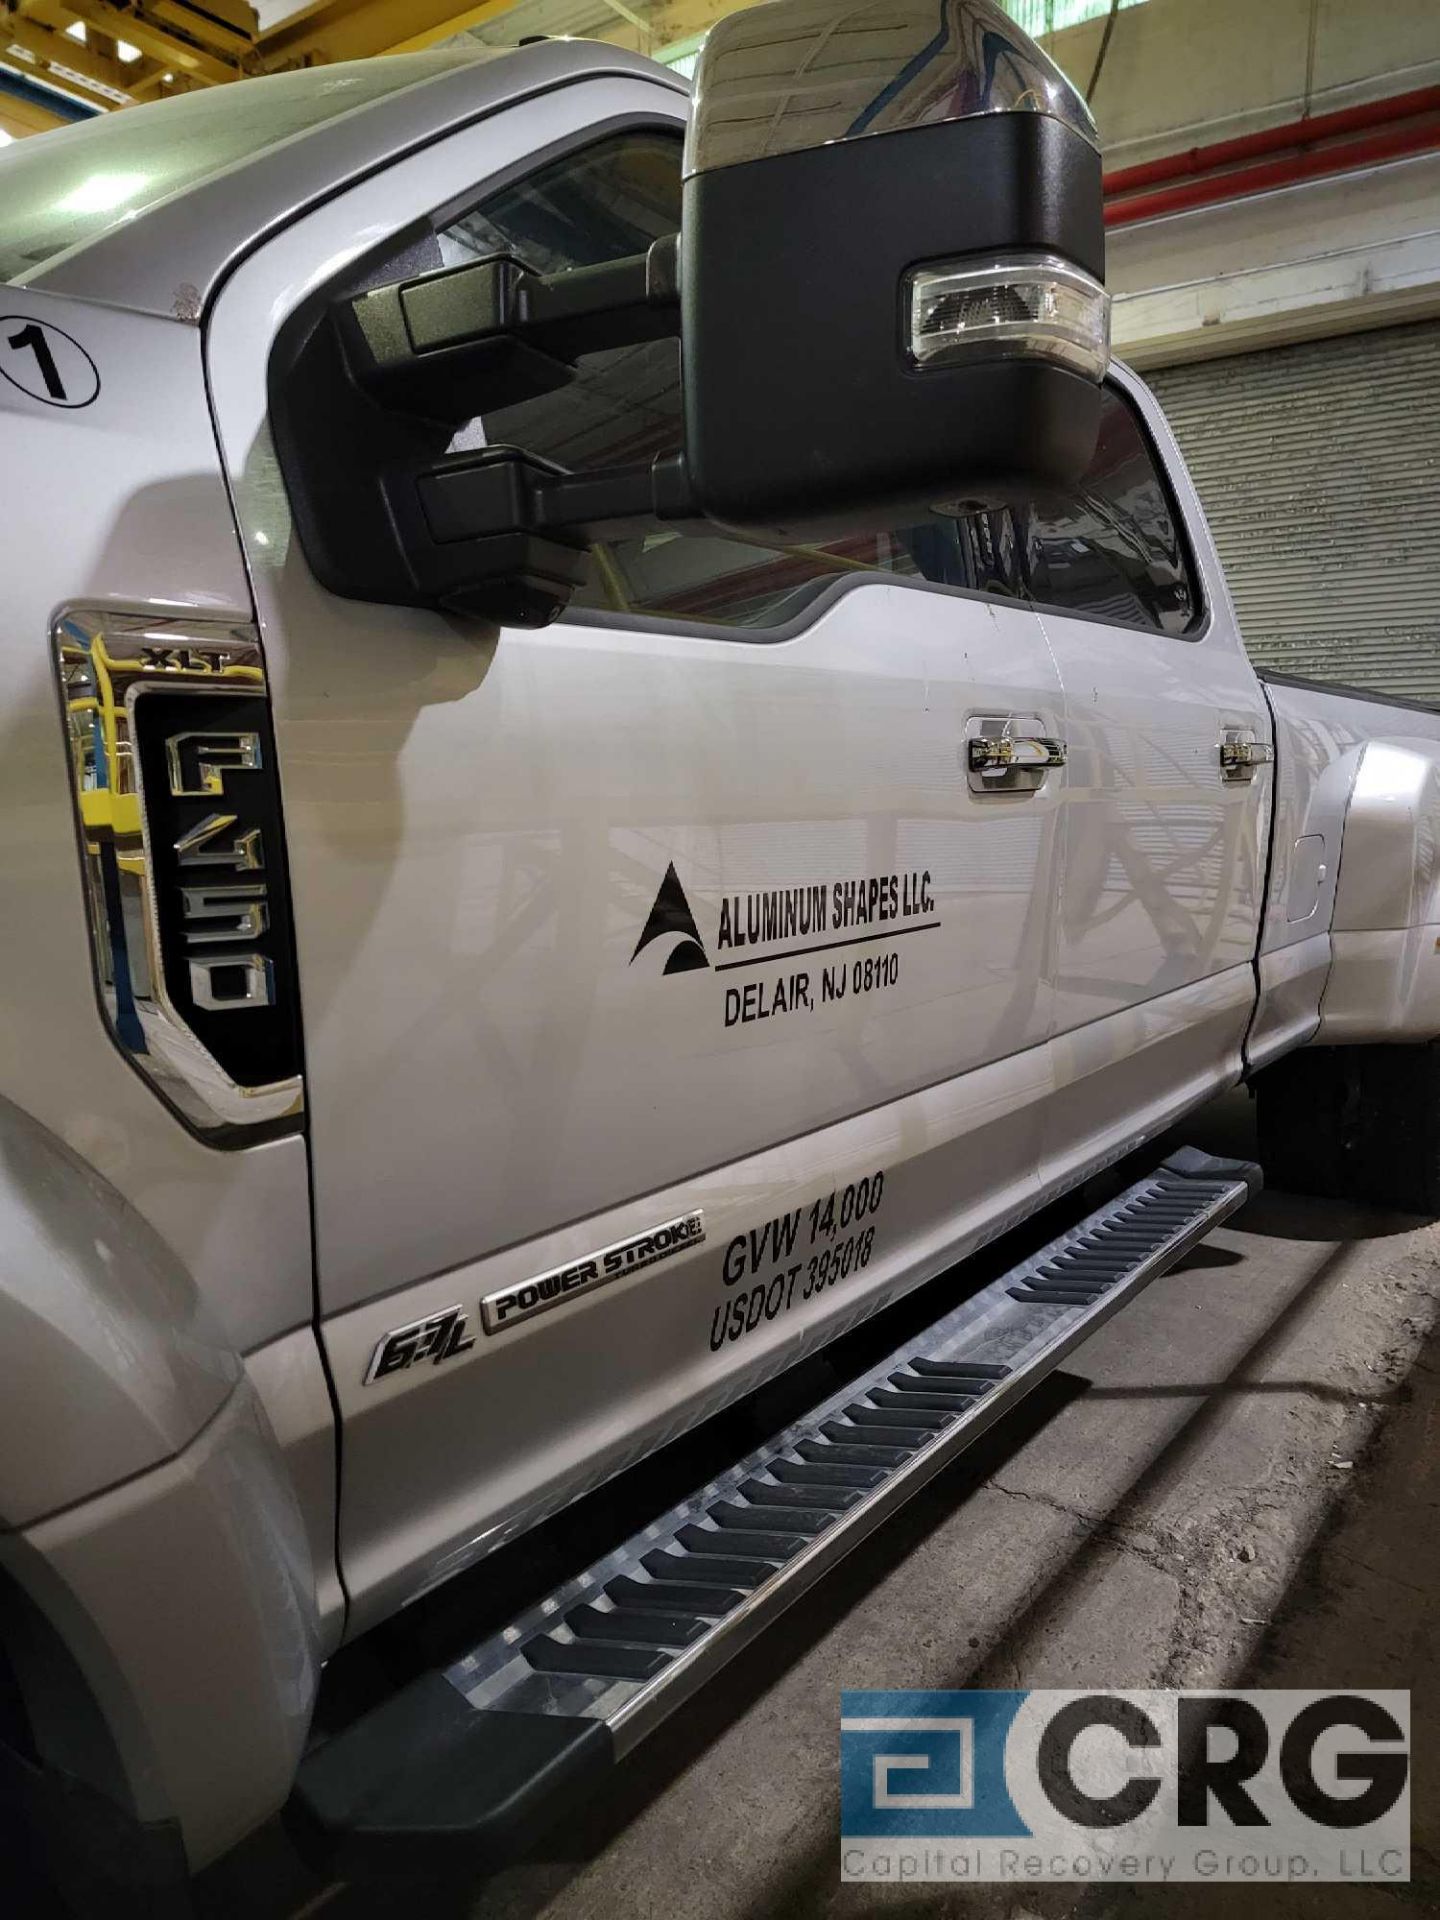 2019 Ford F-450 crew cab dually pick up - Image 5 of 5